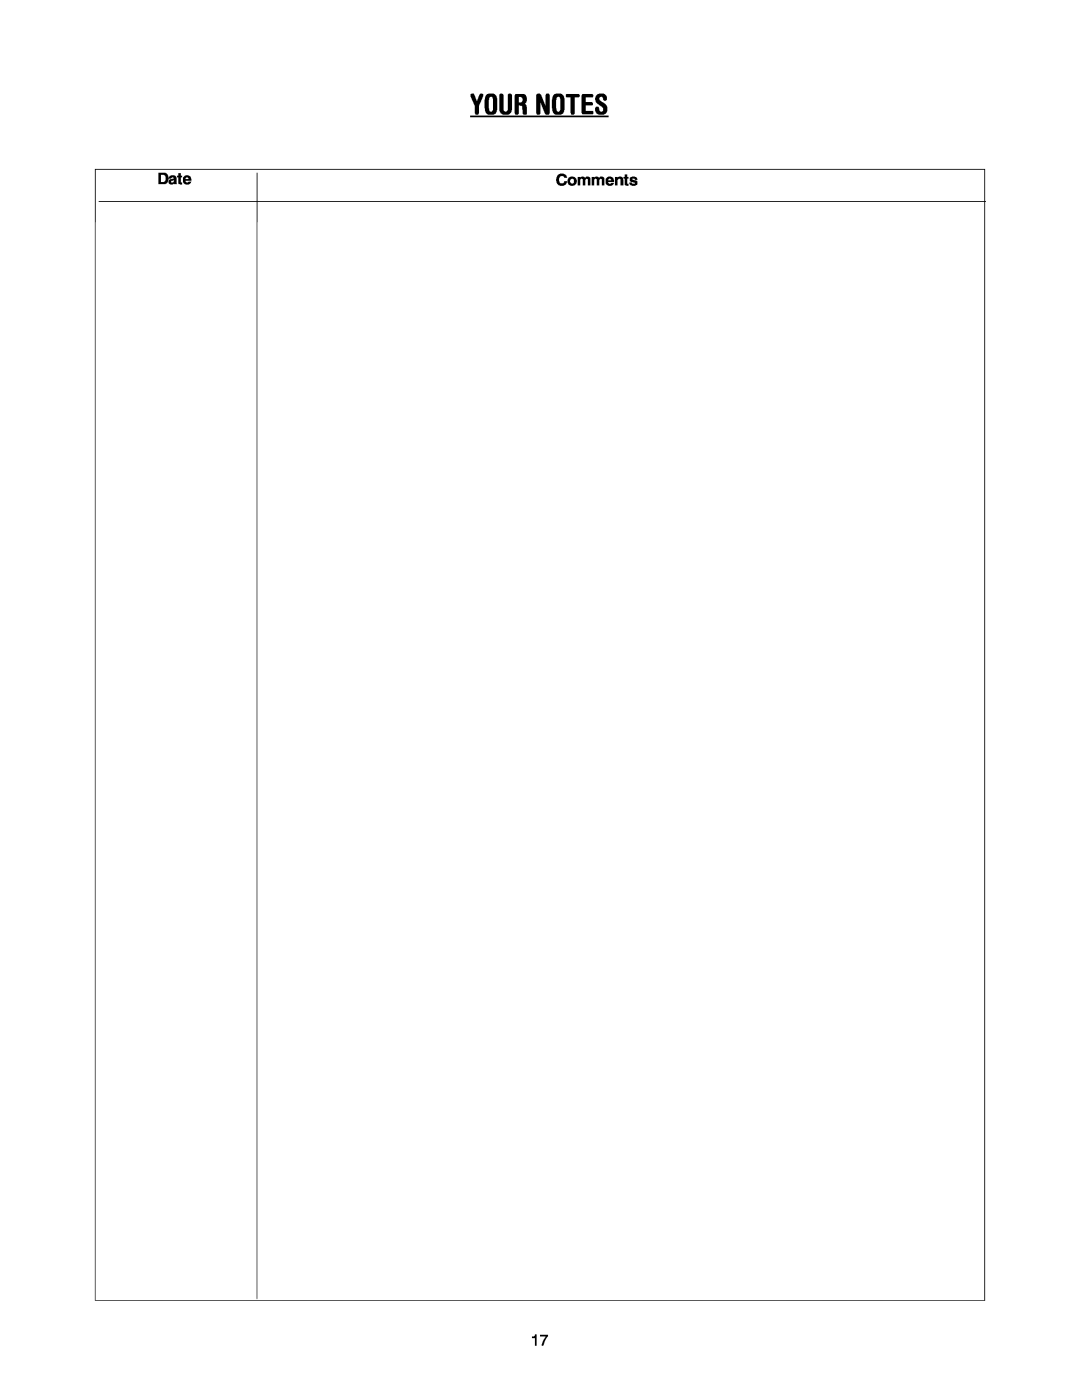 Bolens 416 manual Your Notes, Date, Comments 